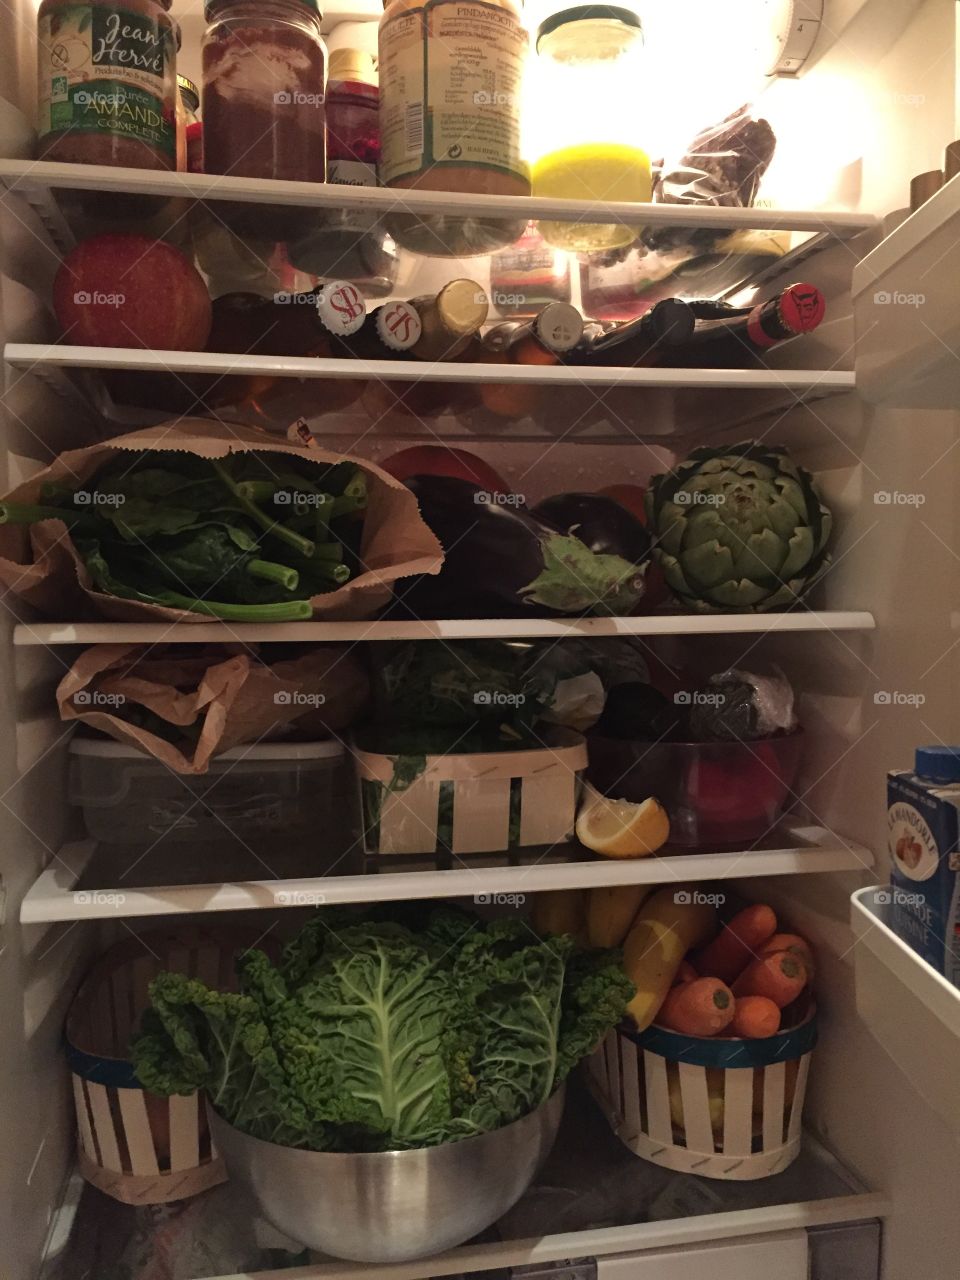 Healthy stocked fridge full of whole foods, vegetables and fruits